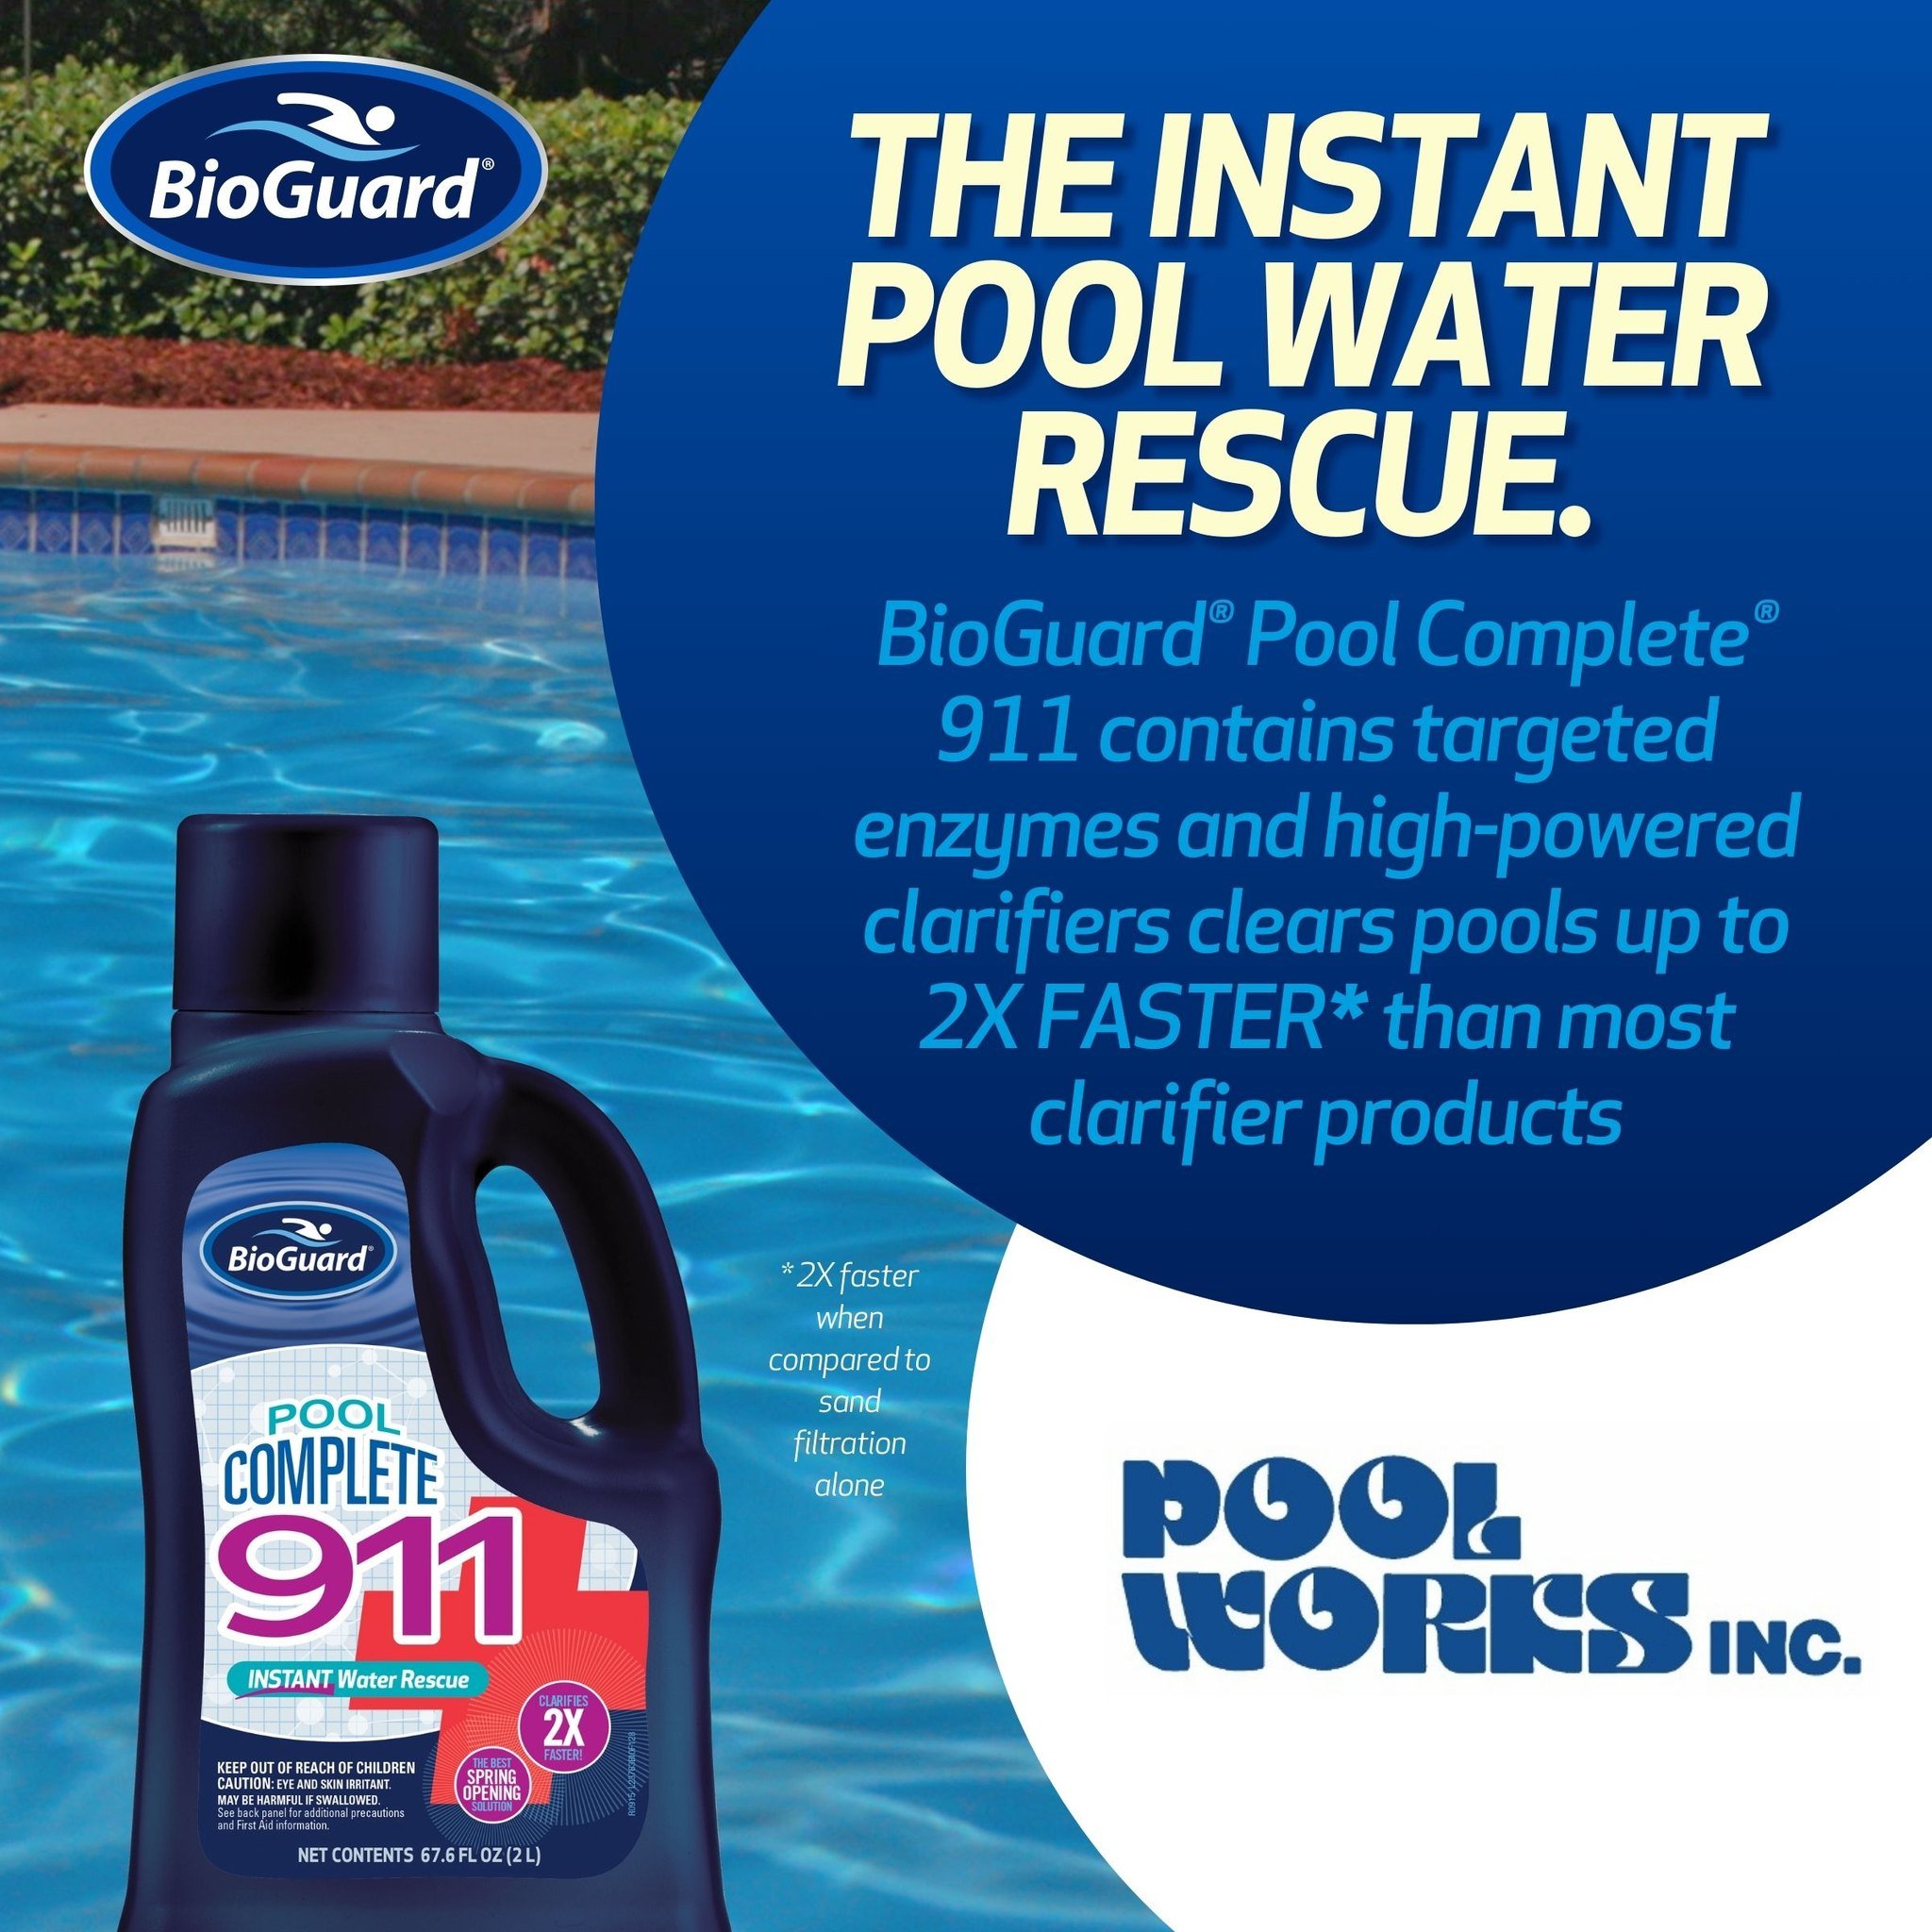 Did you open your pool, get it balanced correctly but are still struggling with cloudy water? HAVE NO FEAR! Pool Complete&reg; 911 is HERE TO THE RESCUE!!!!! Use BioGuard&reg; Pool Complete&reg; 911 to clear cloudy water faster than ever!

https://po